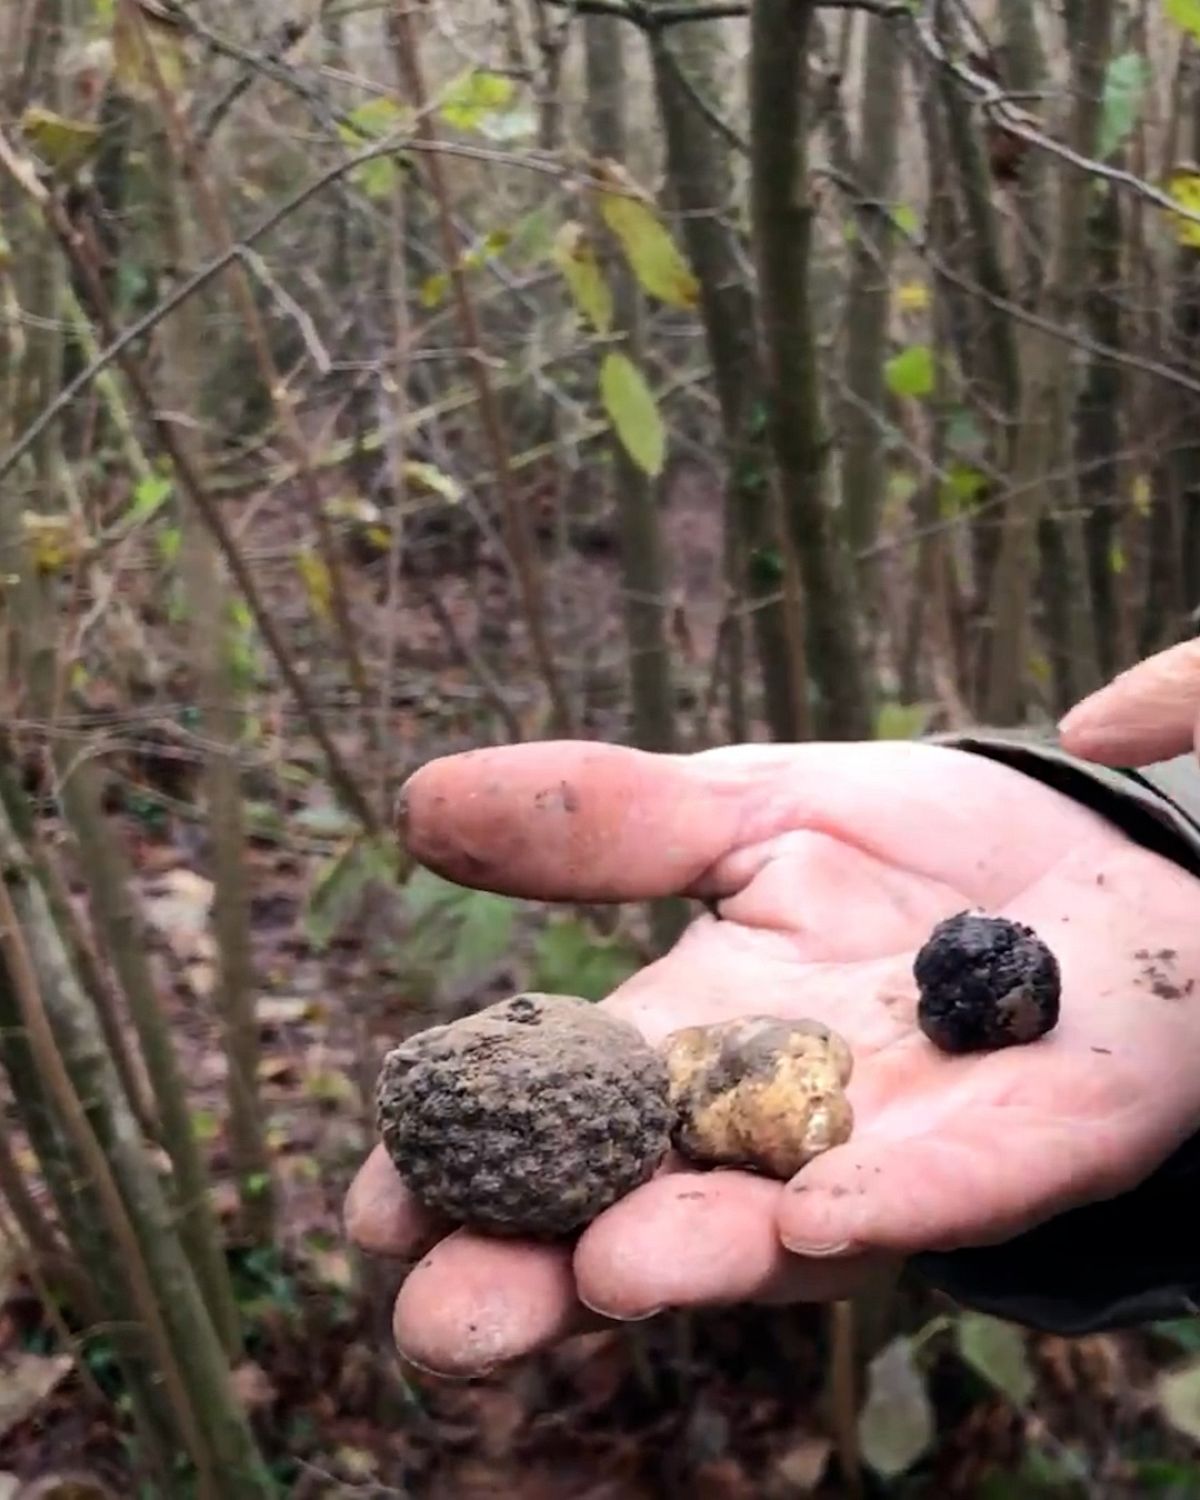 Truffle season is underway in Northern Italy and it's a whole lot of